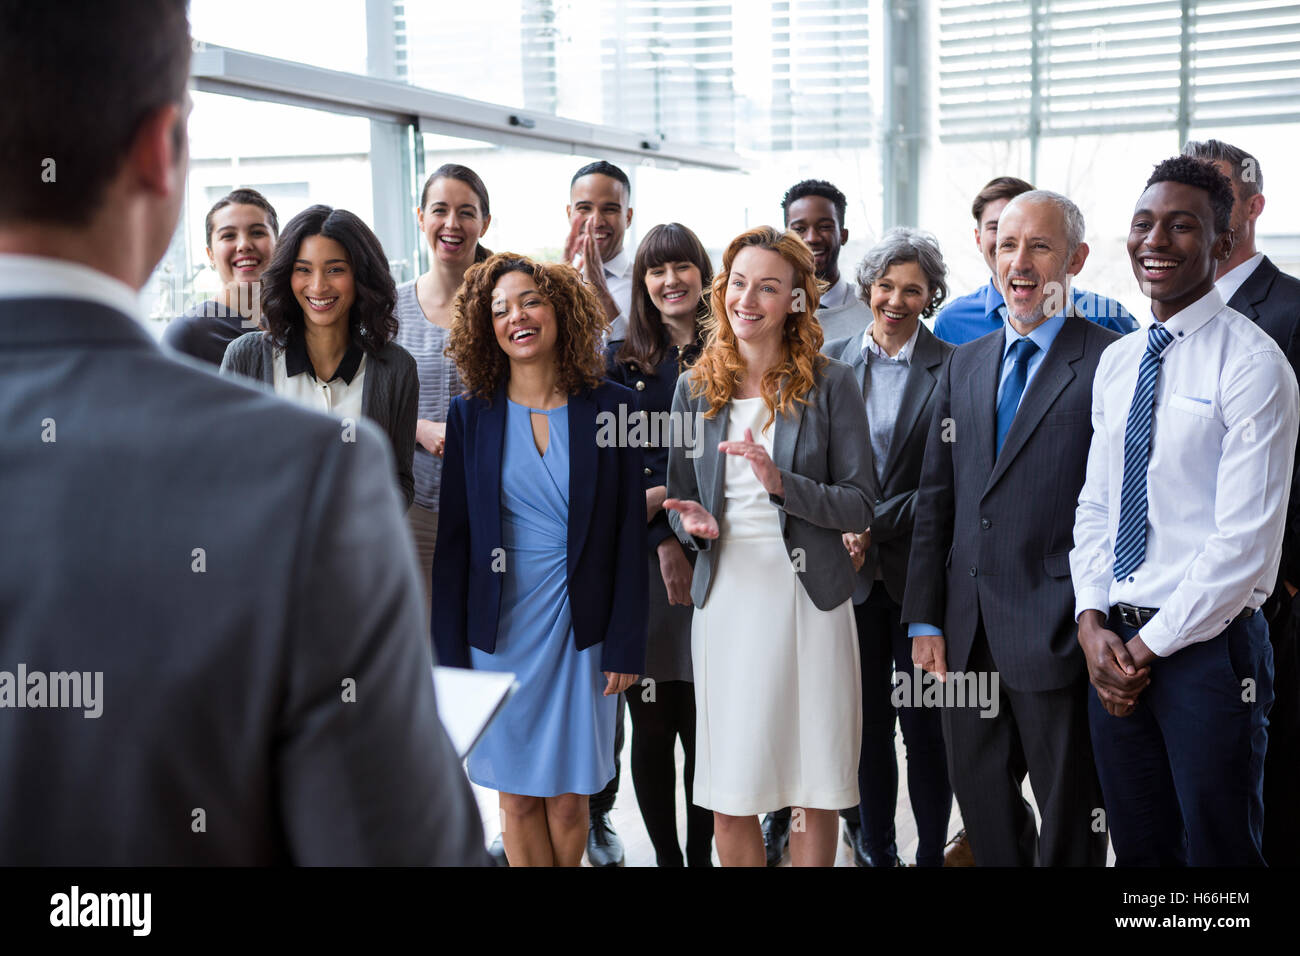 Businessman interacting with colleagues Stock Photo